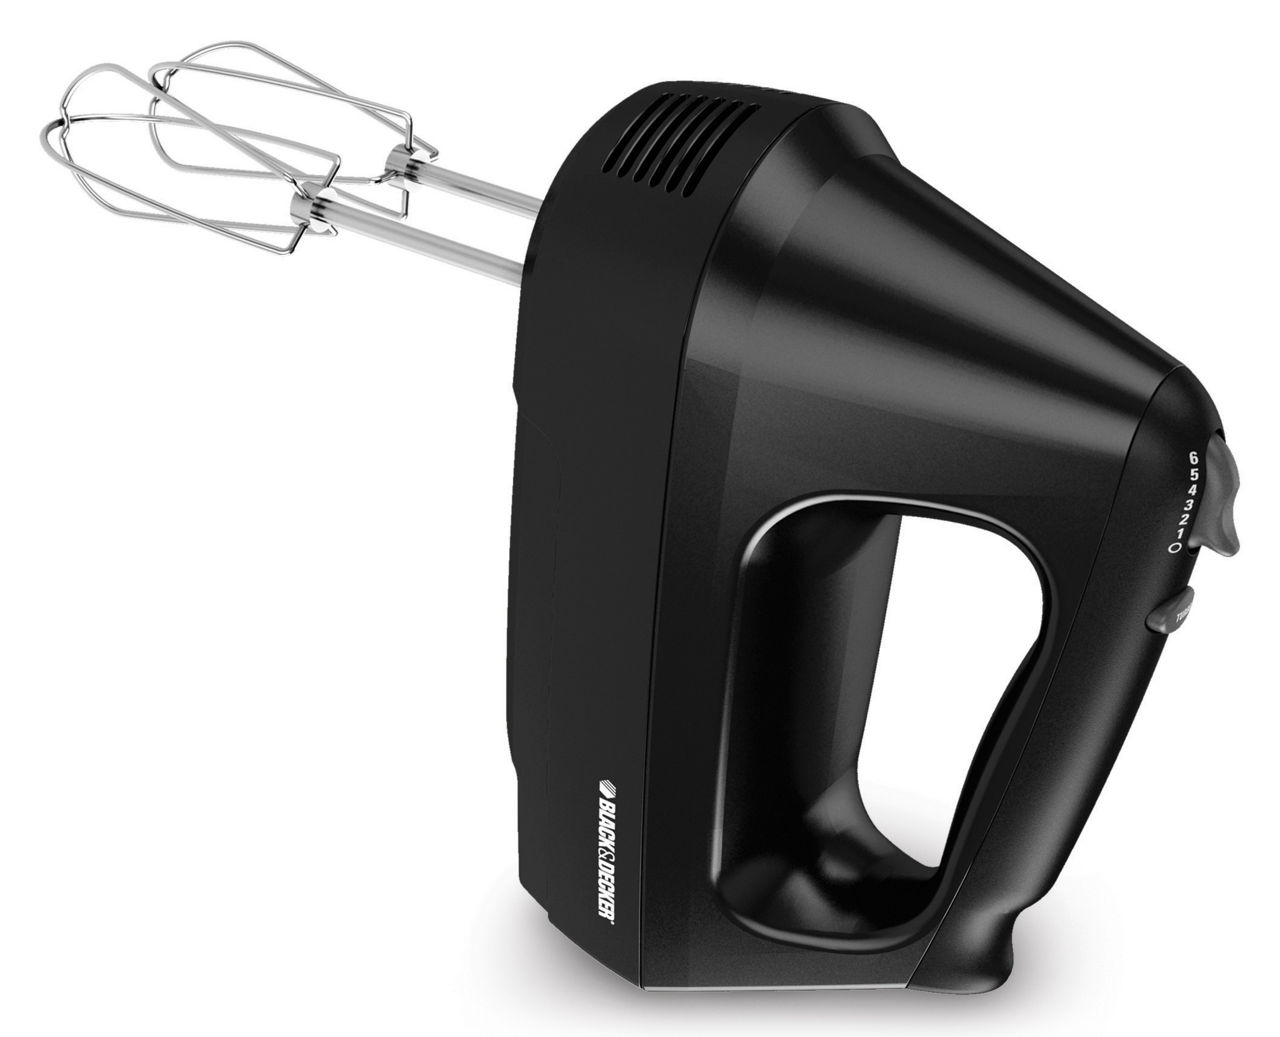 Black+Decker Black/Silver 5 speed Hand Mixer - Total Qty: 1, Count